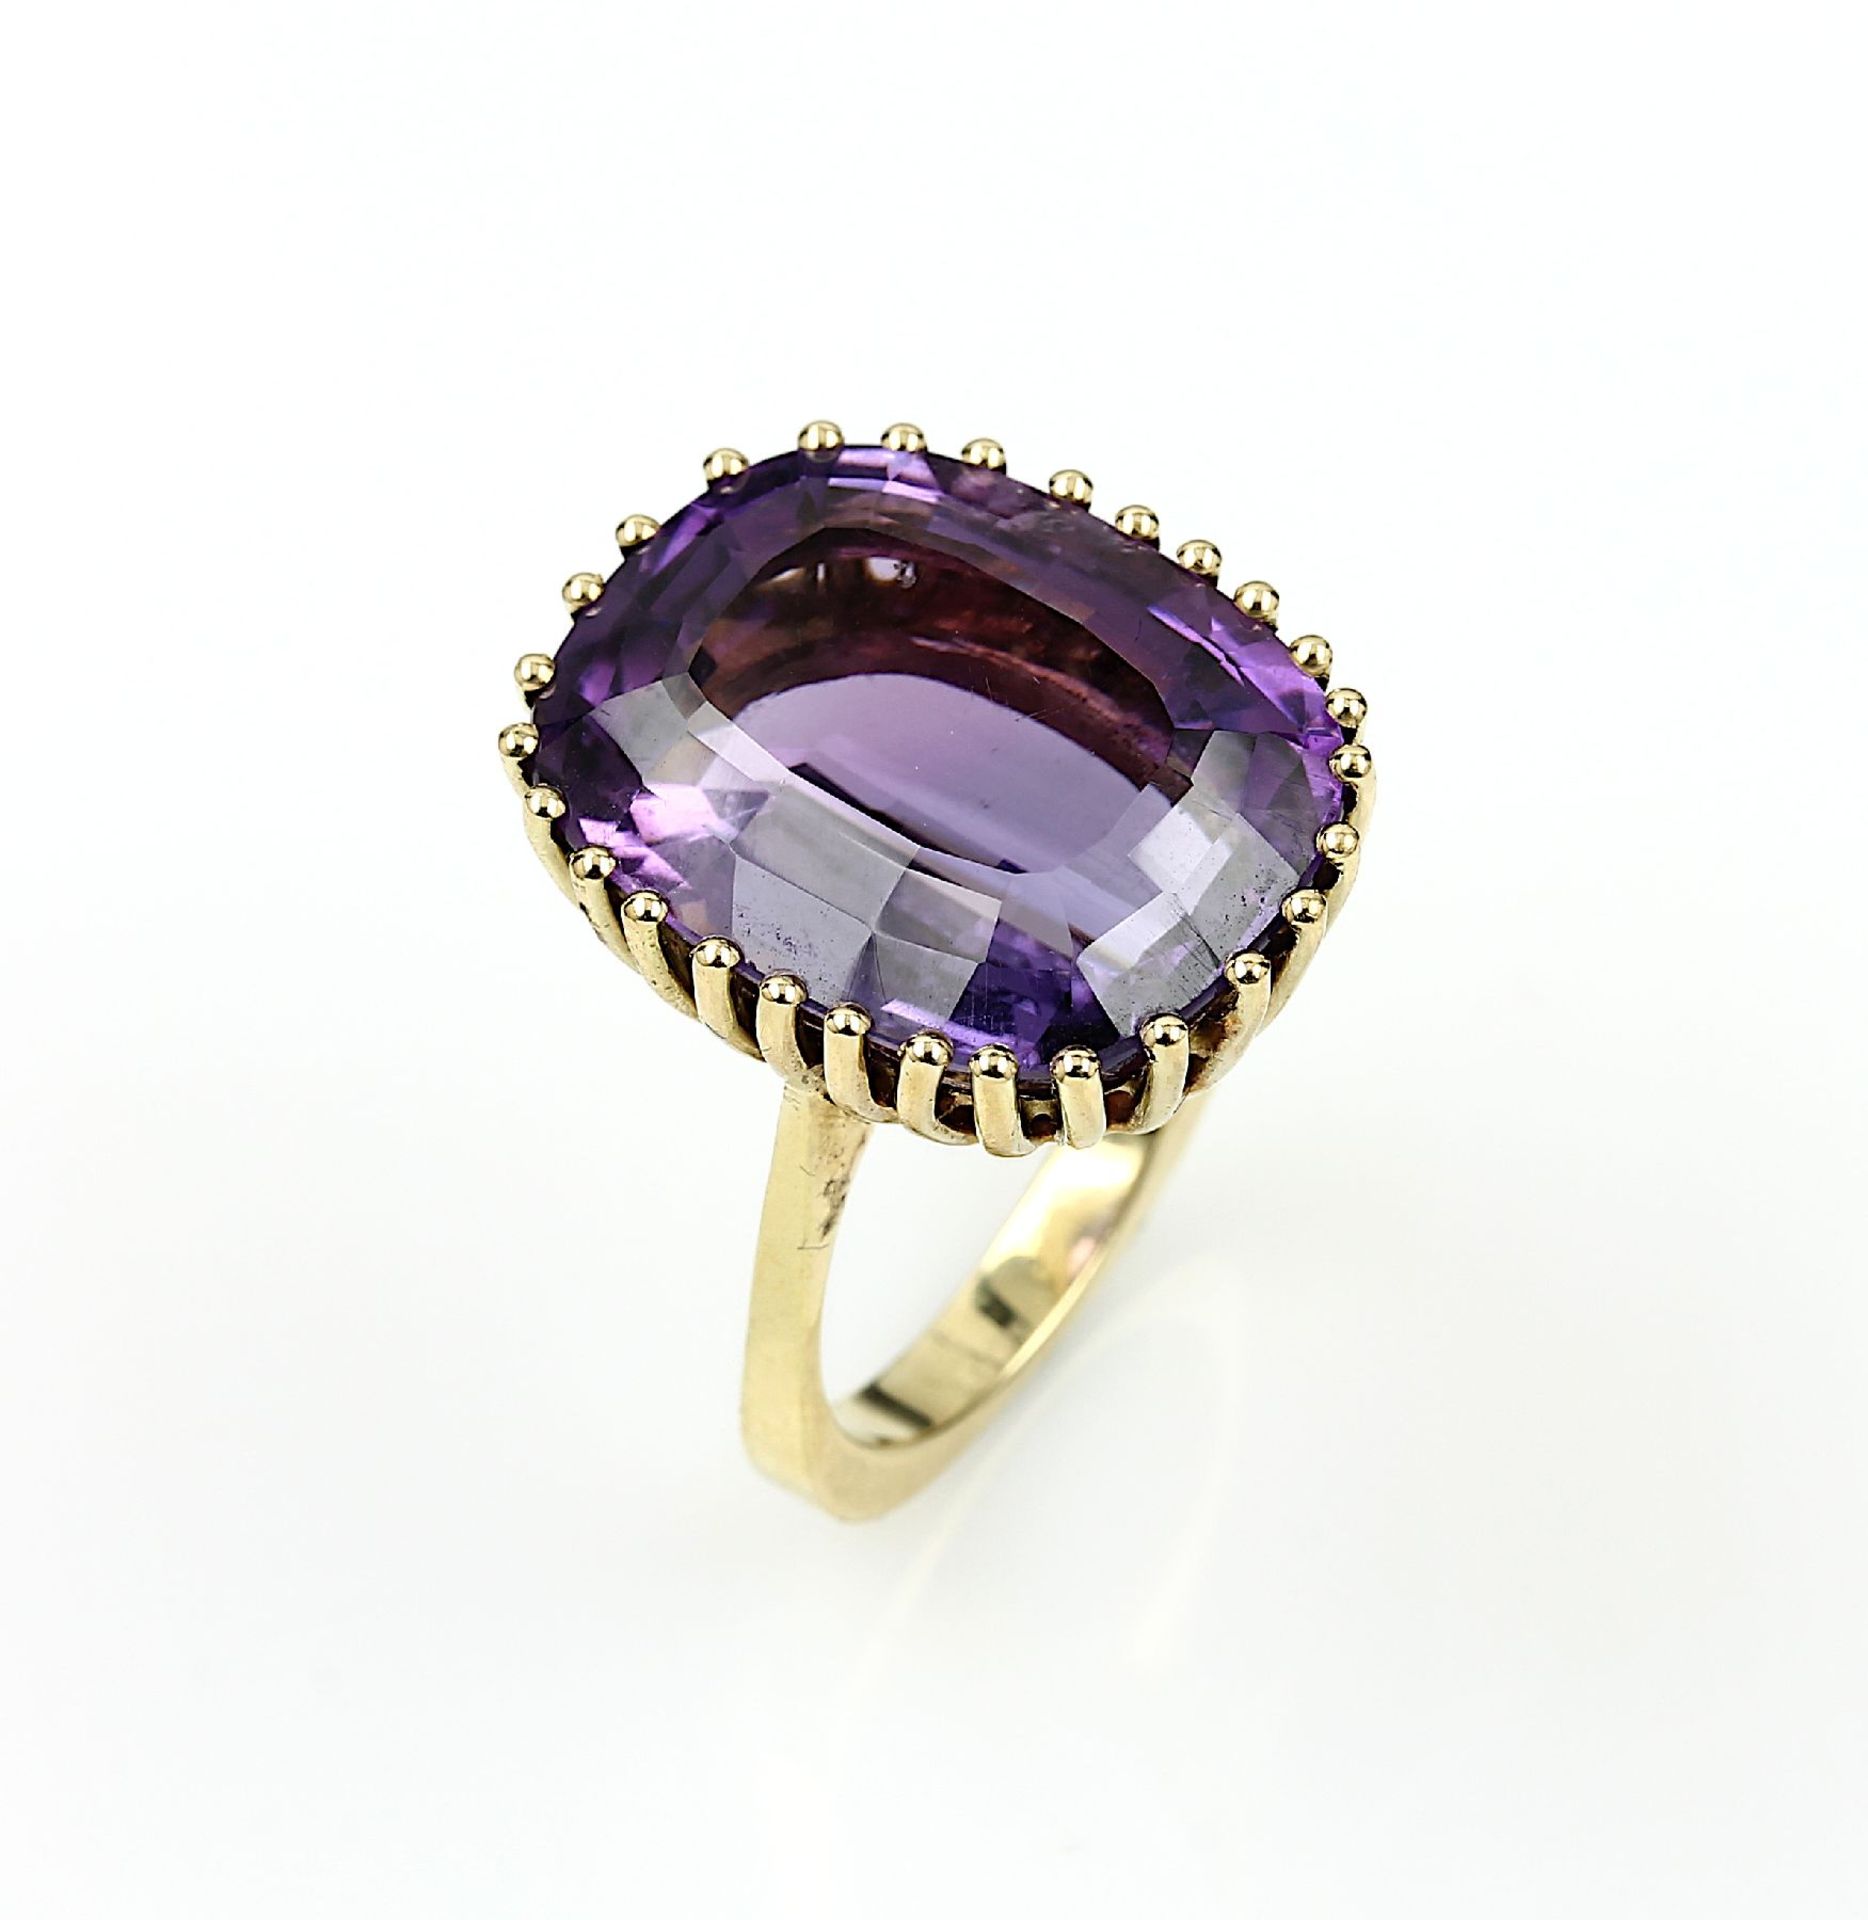 14 kt gold ring with amethyst , YG 585/000, oval bevelled amethyst approx. 12 ct, ringsize 53,